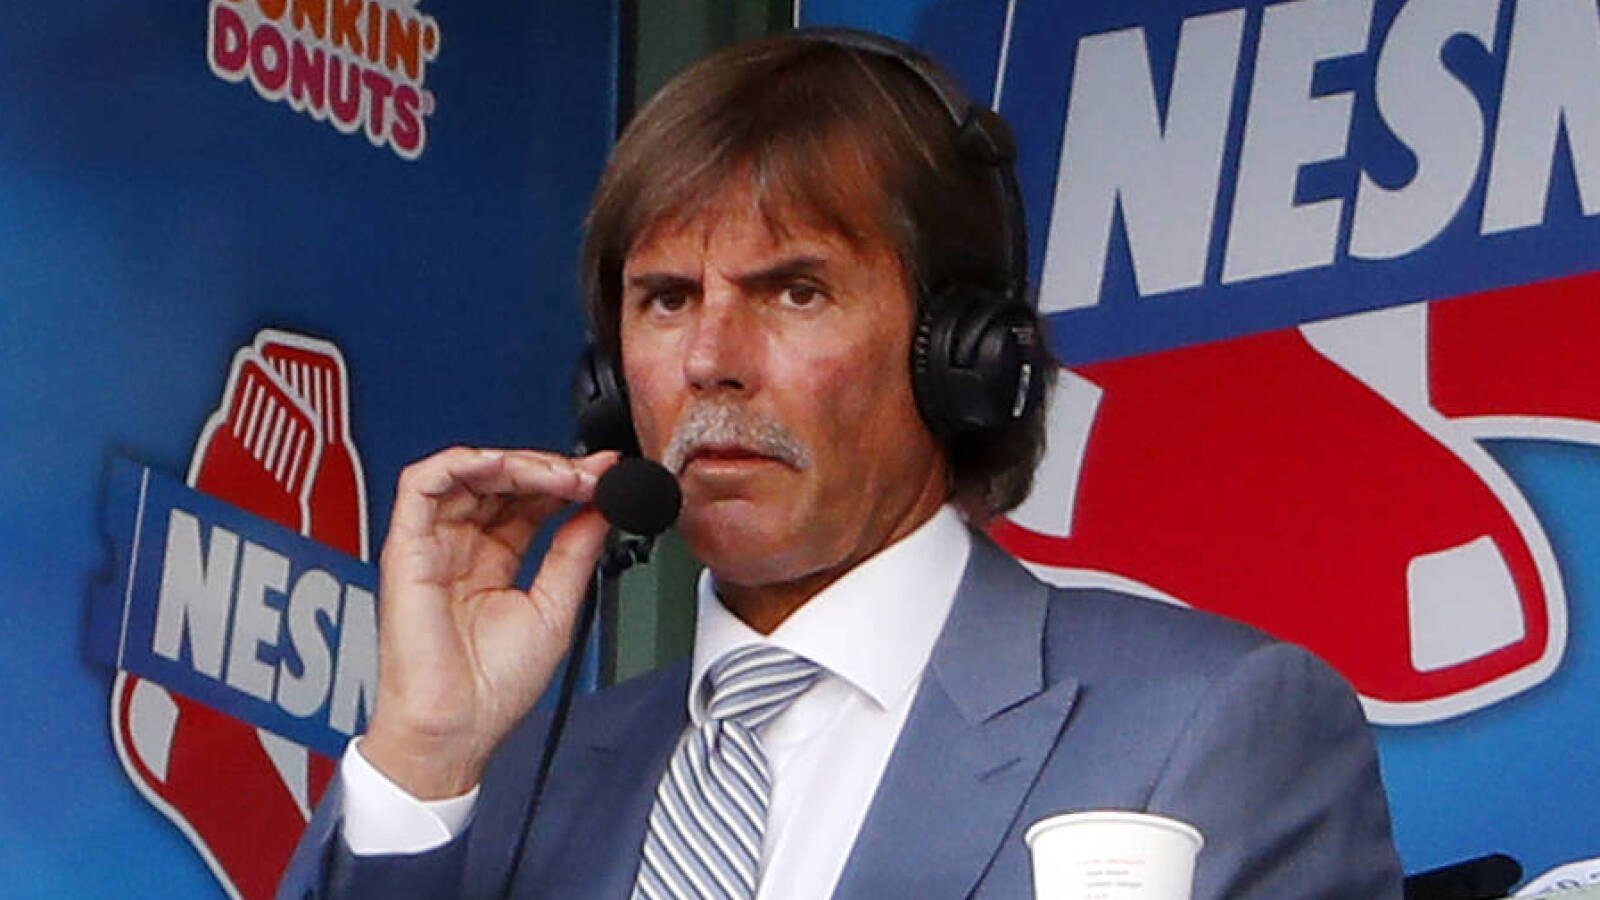 Hall of Famer Dennis Eckersley retiring from Red Sox broadcast booth at end of season